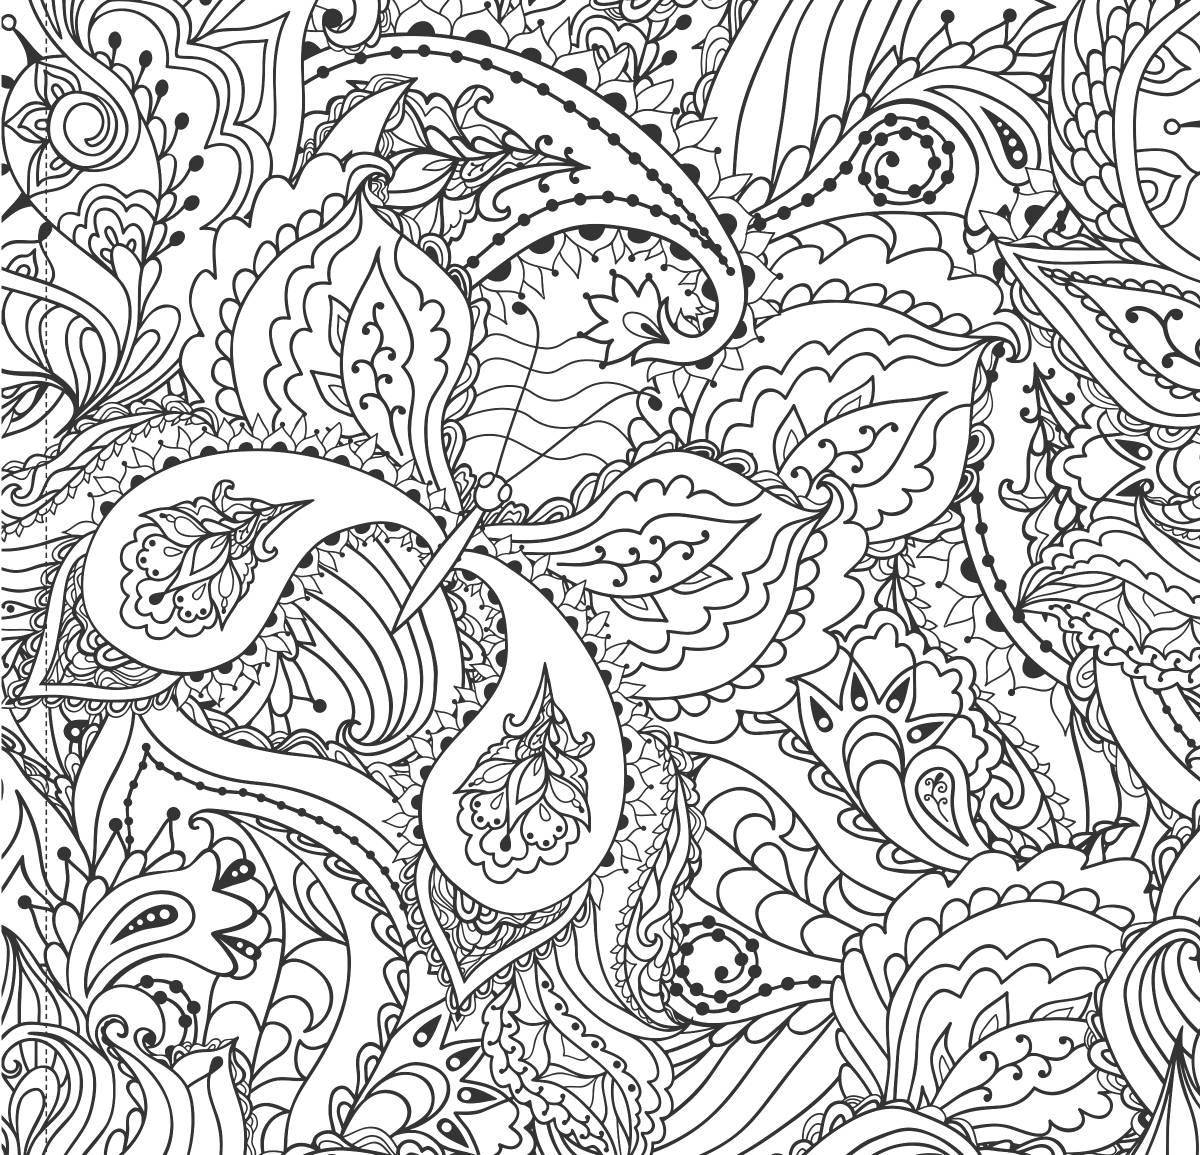 Intriguing coloring book with a pattern